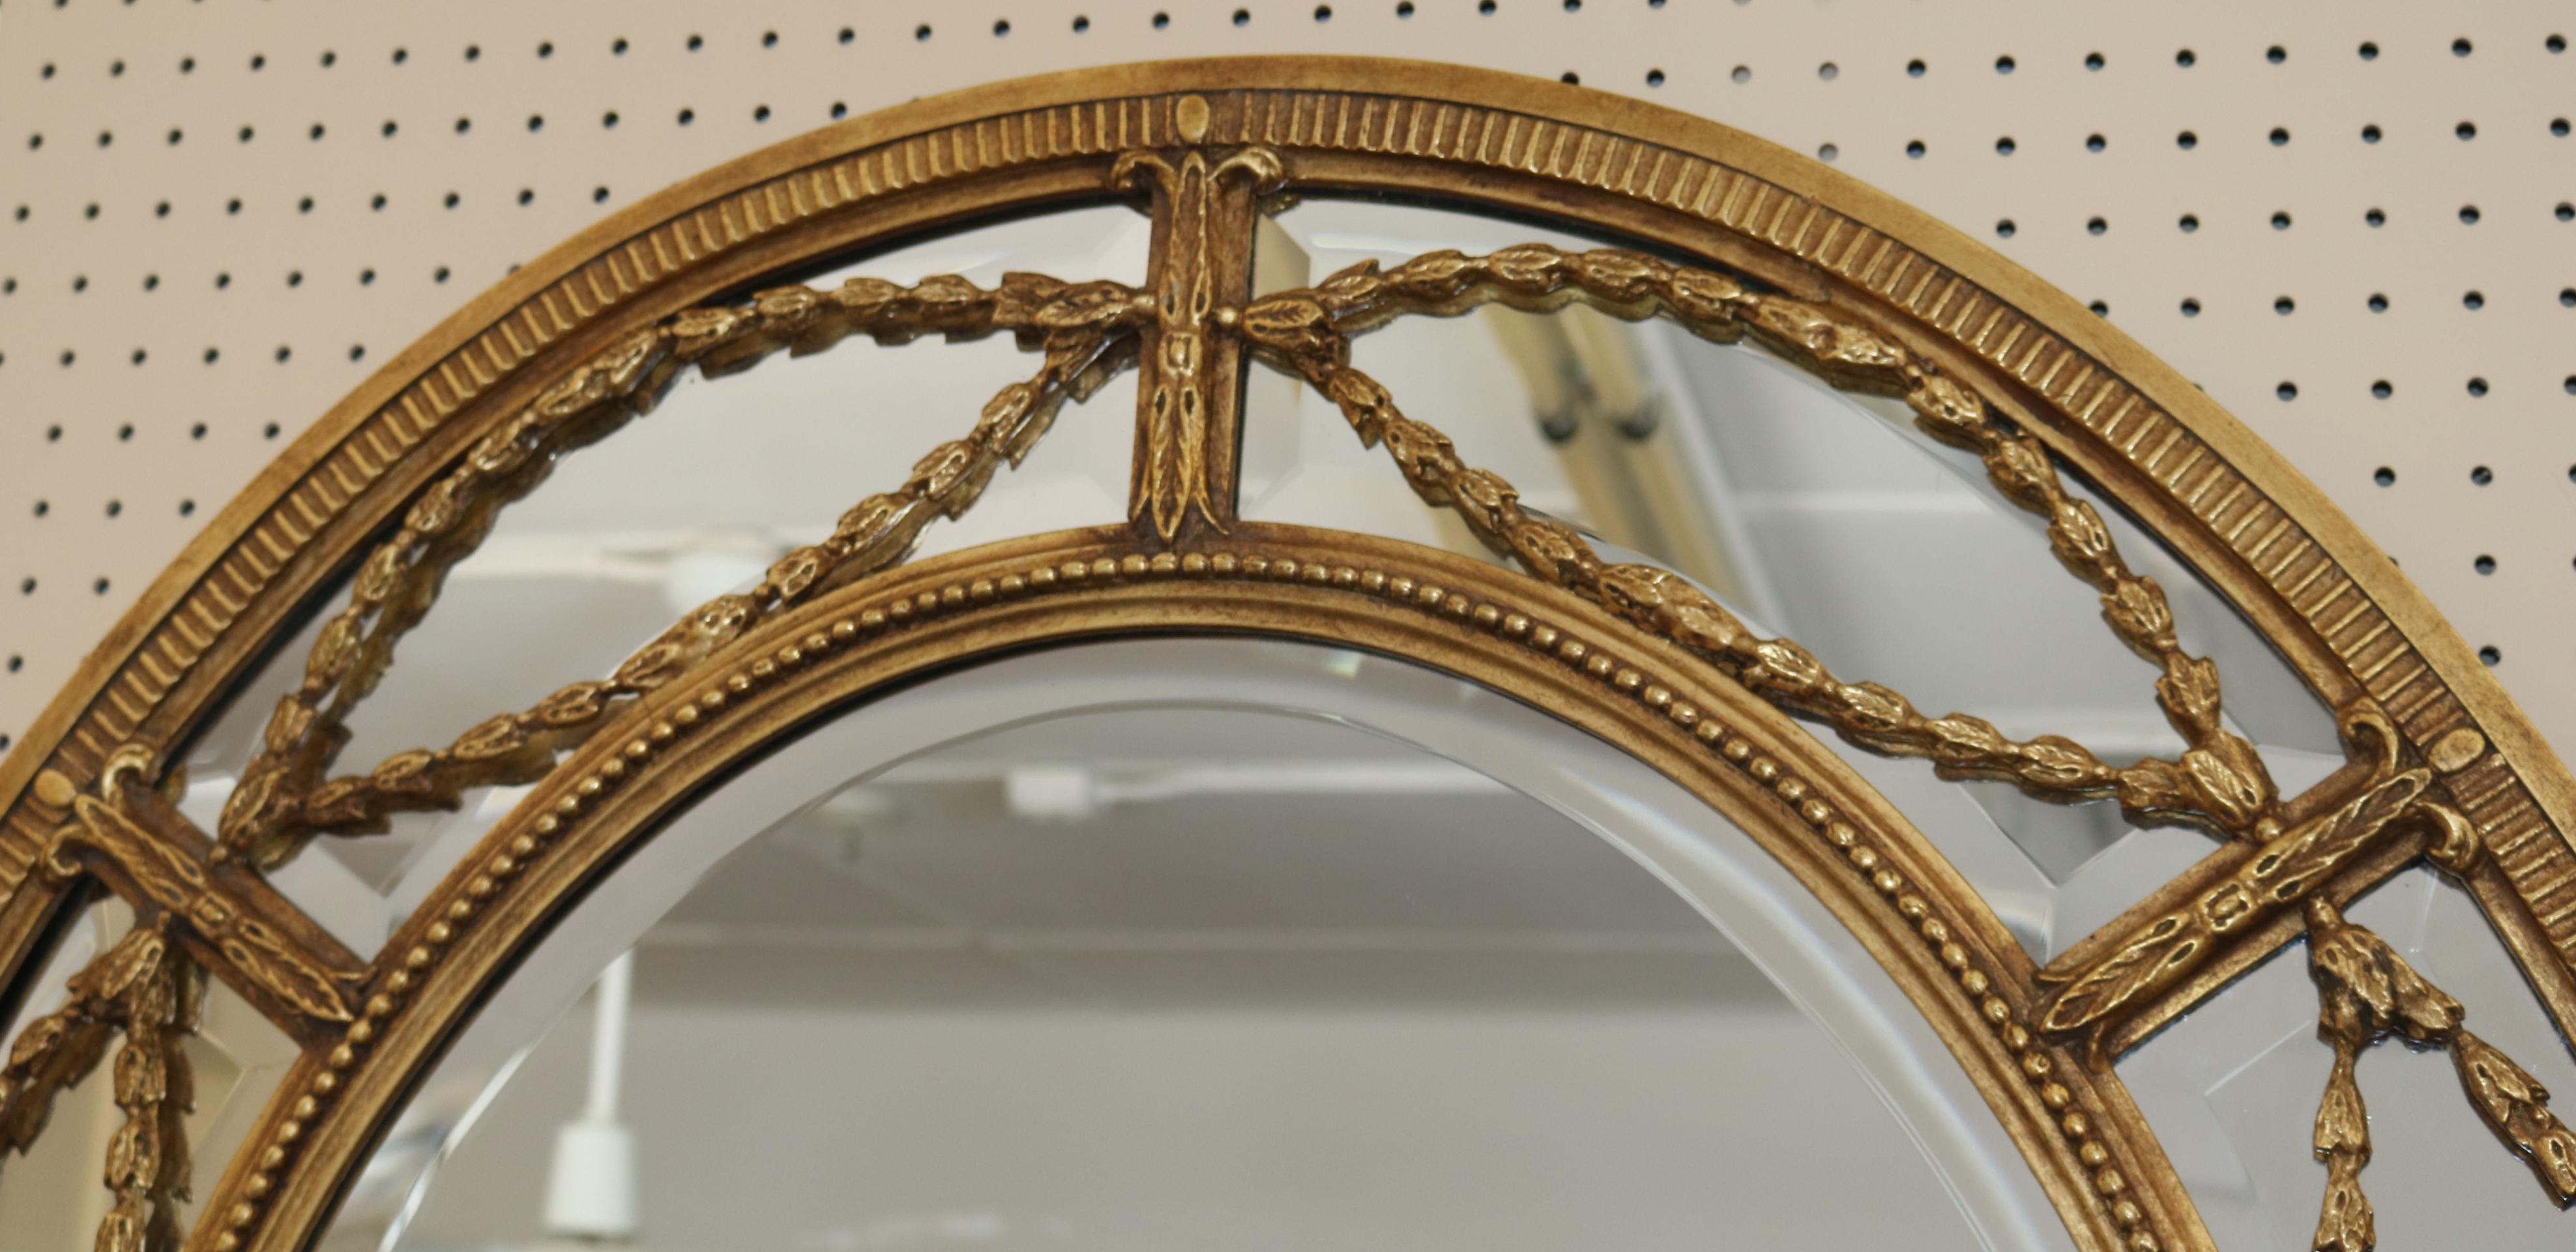 Friedman Brothers Beveled Mirror Model Adamesque Horizontal or Vertical In Good Condition For Sale In Long Branch, NJ